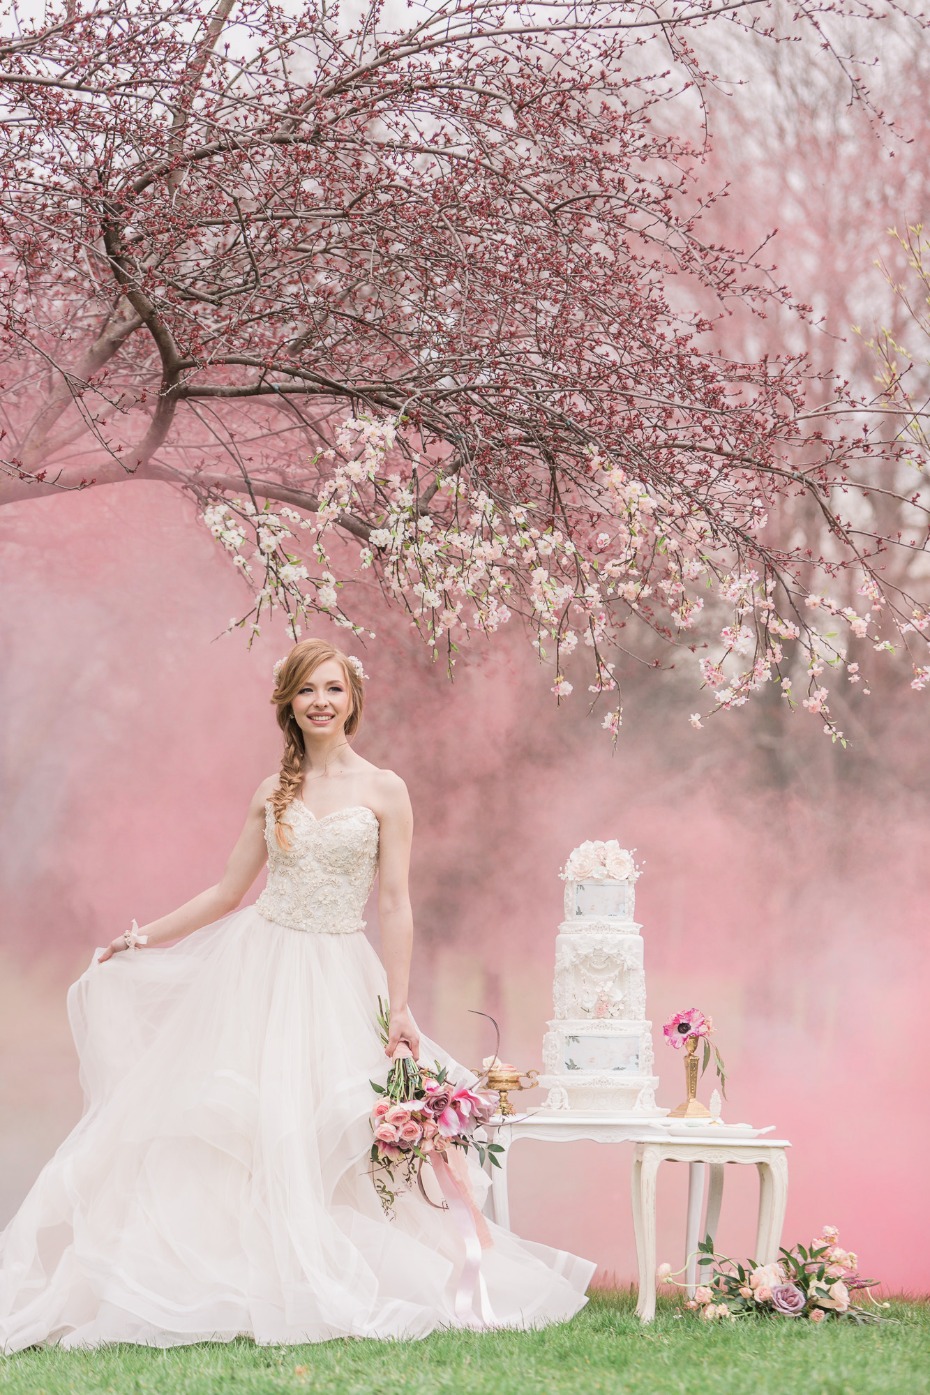 Cherry blossoms, smoke bombs and a lovely cake